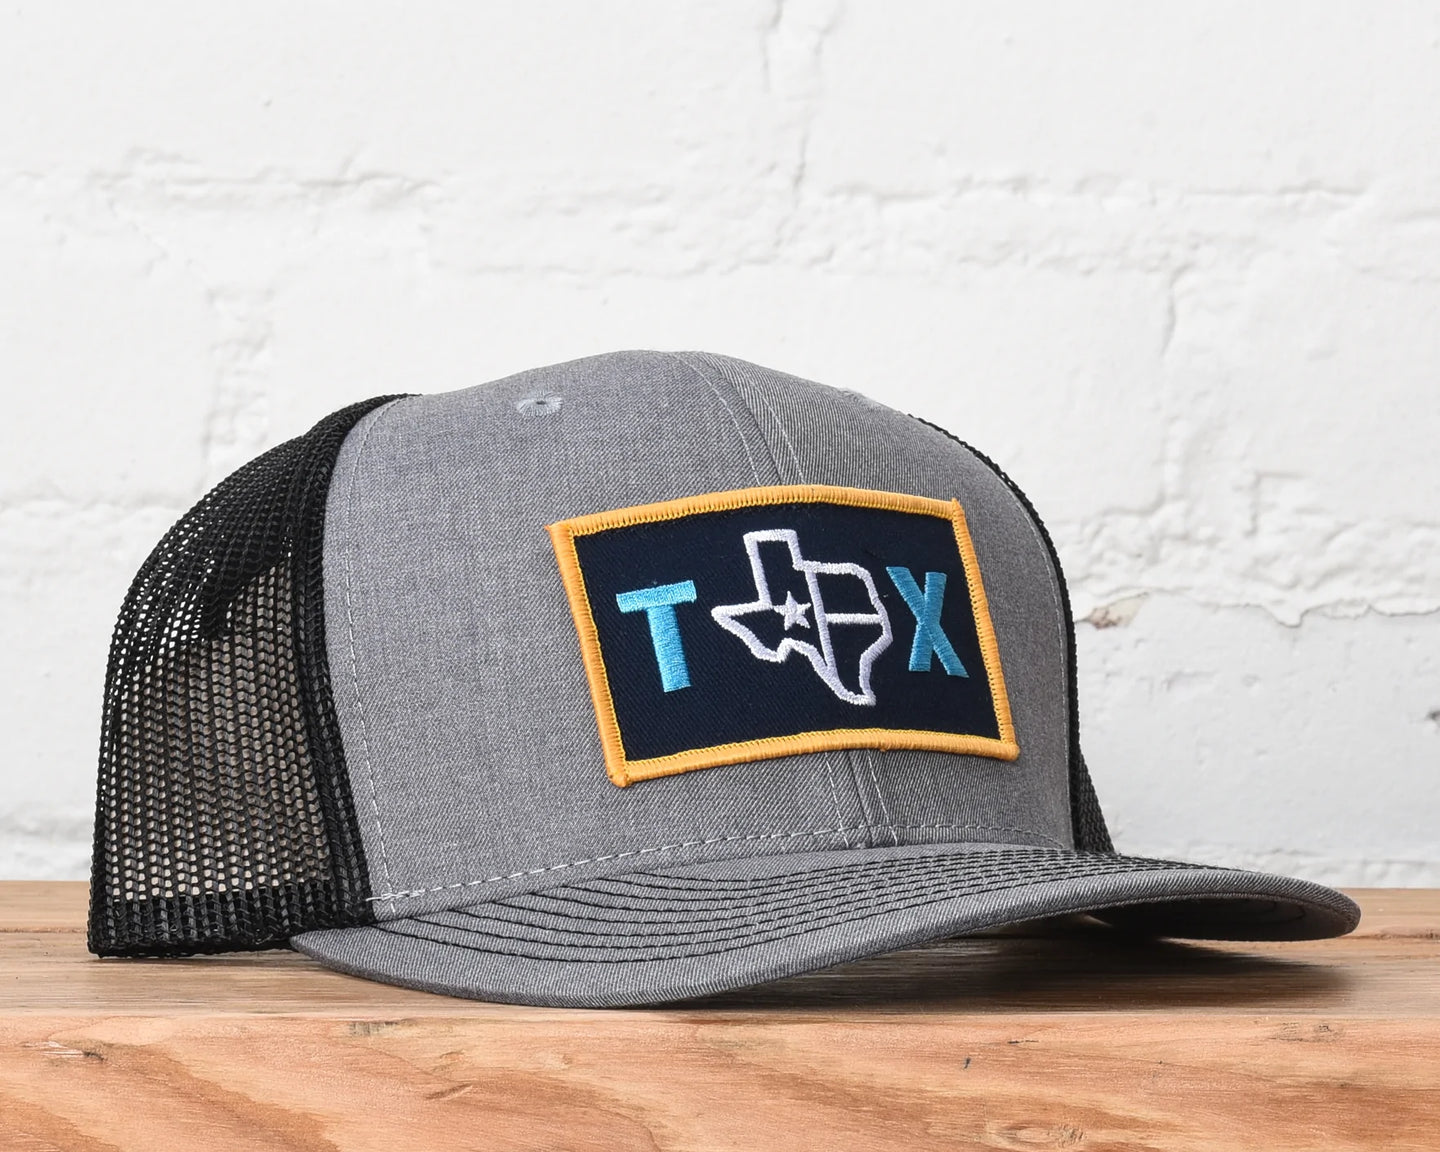 Classic State State of Texas Snapback - Grey/Black